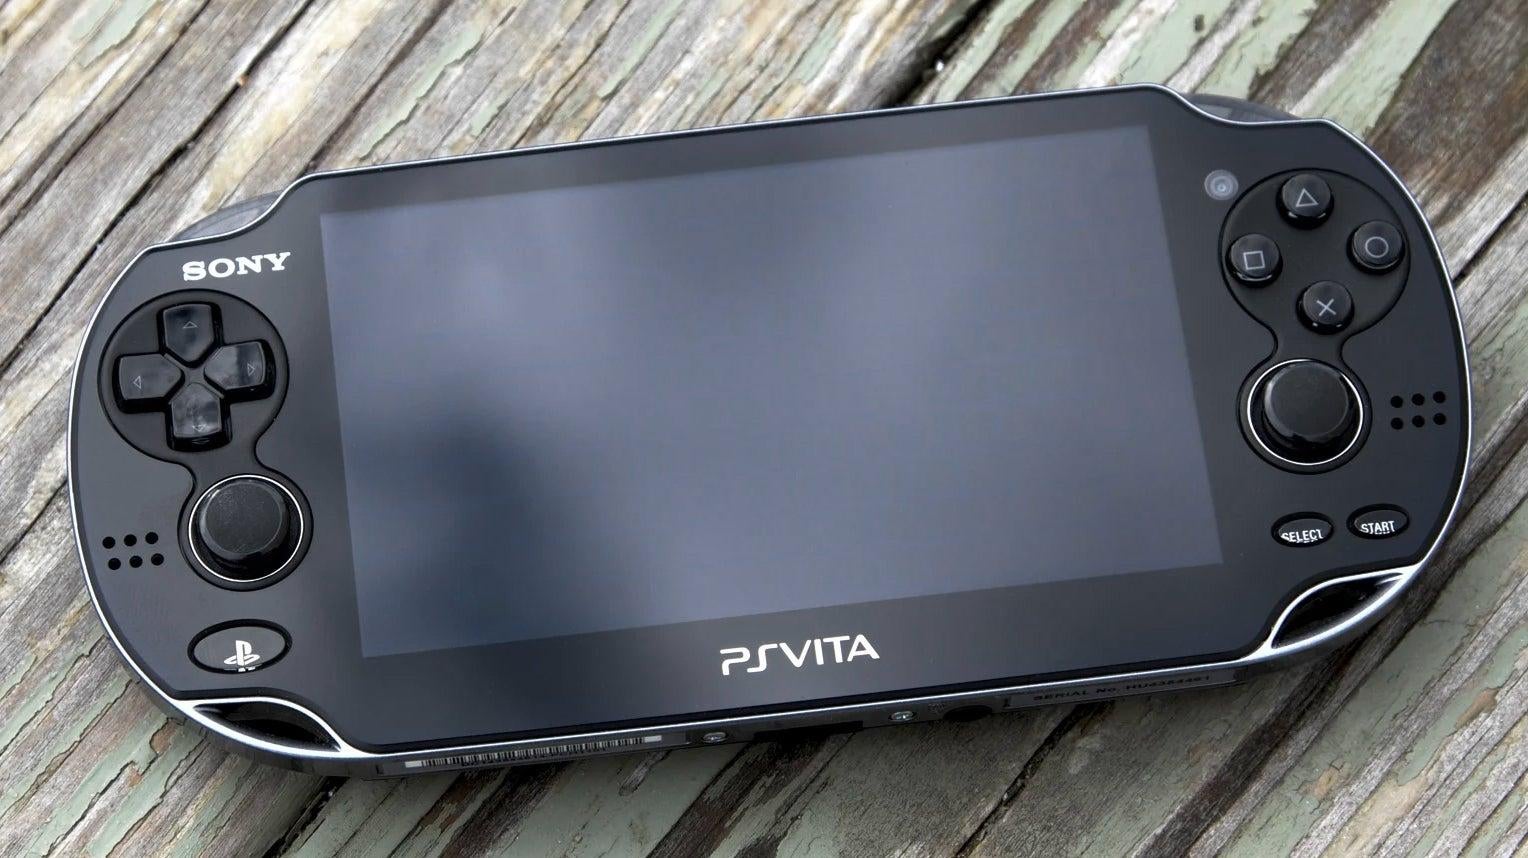 Sony's PSVita was a solid piece of gaming tech, but with the advent of handheld consoles, Sony could make a real statement if it decides to make a Steam Deck but for PlayStation. (Photo: Gizmodo)